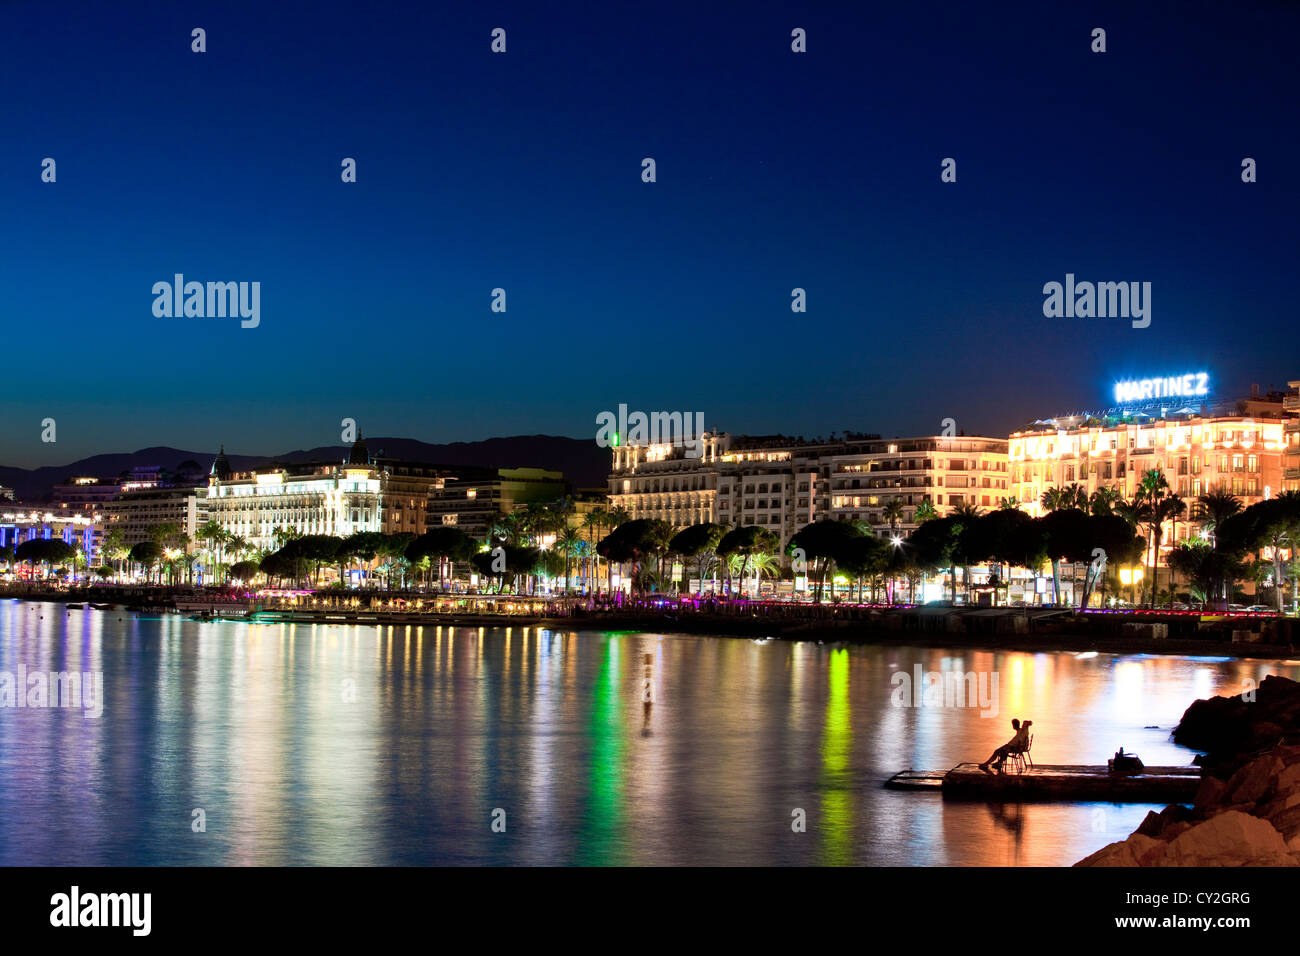 The famous art deco style Grand Hotel Martinez and Carlton on the Croisette at Cannes at dusk, France Stock Photo